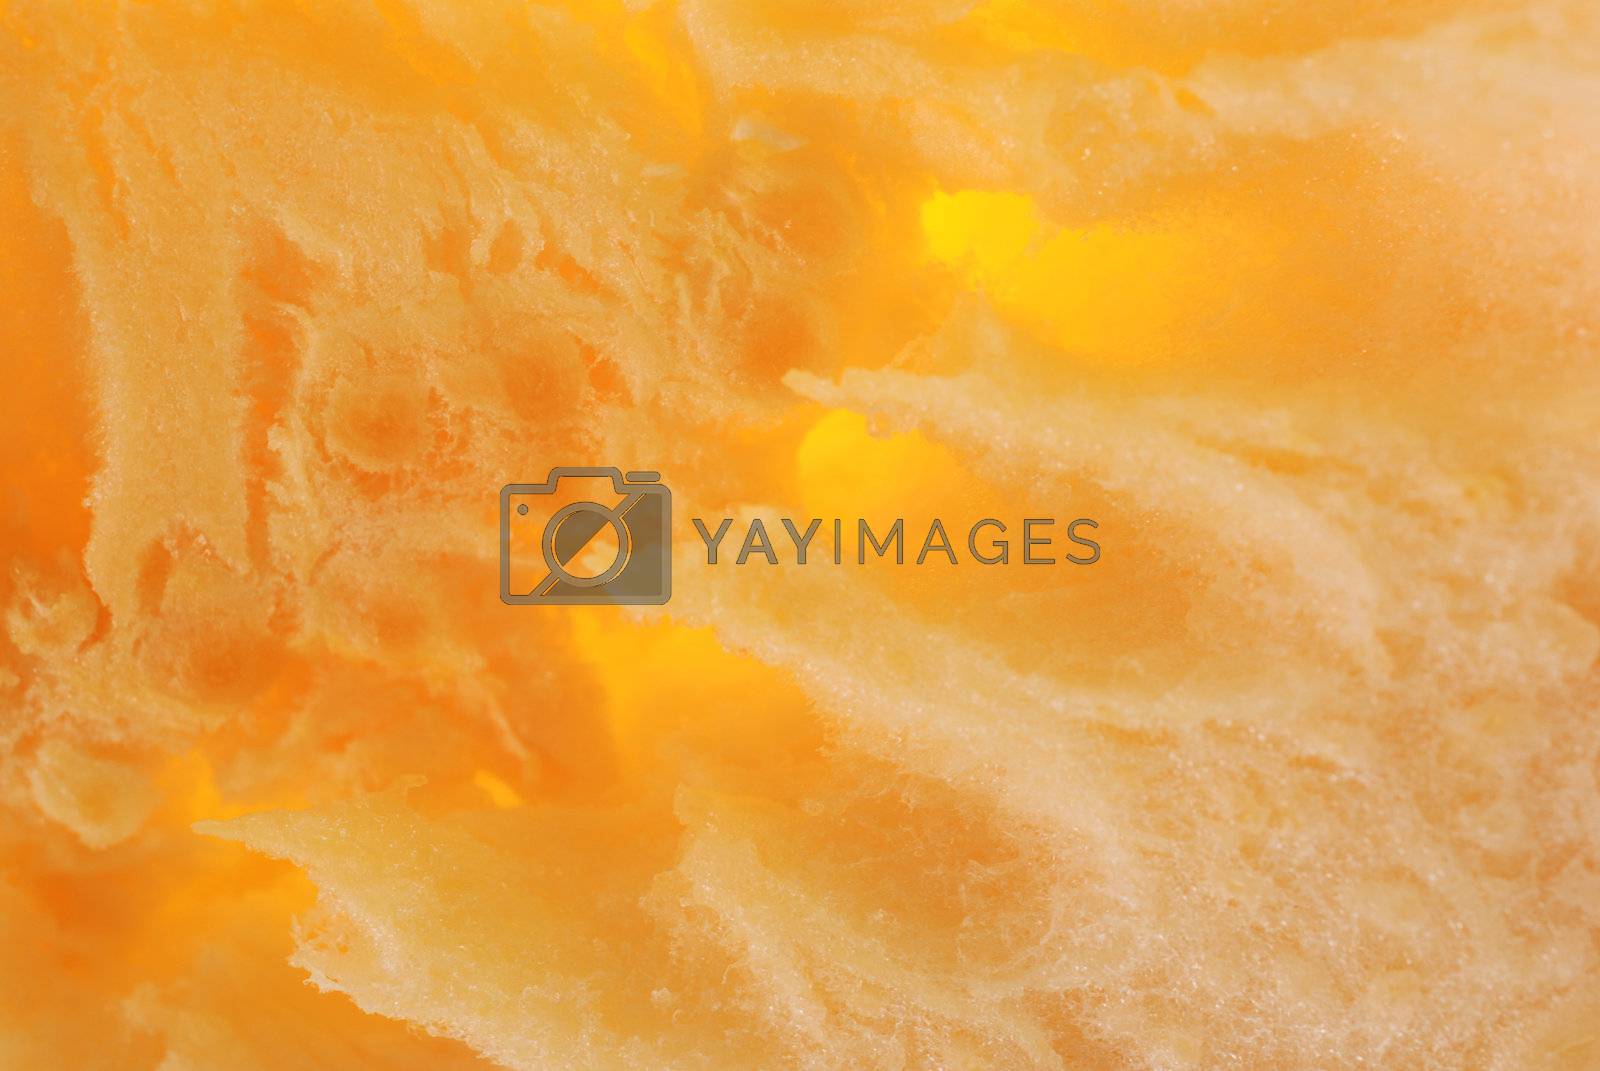 Royalty free image of  Pumpkin. by Lloid